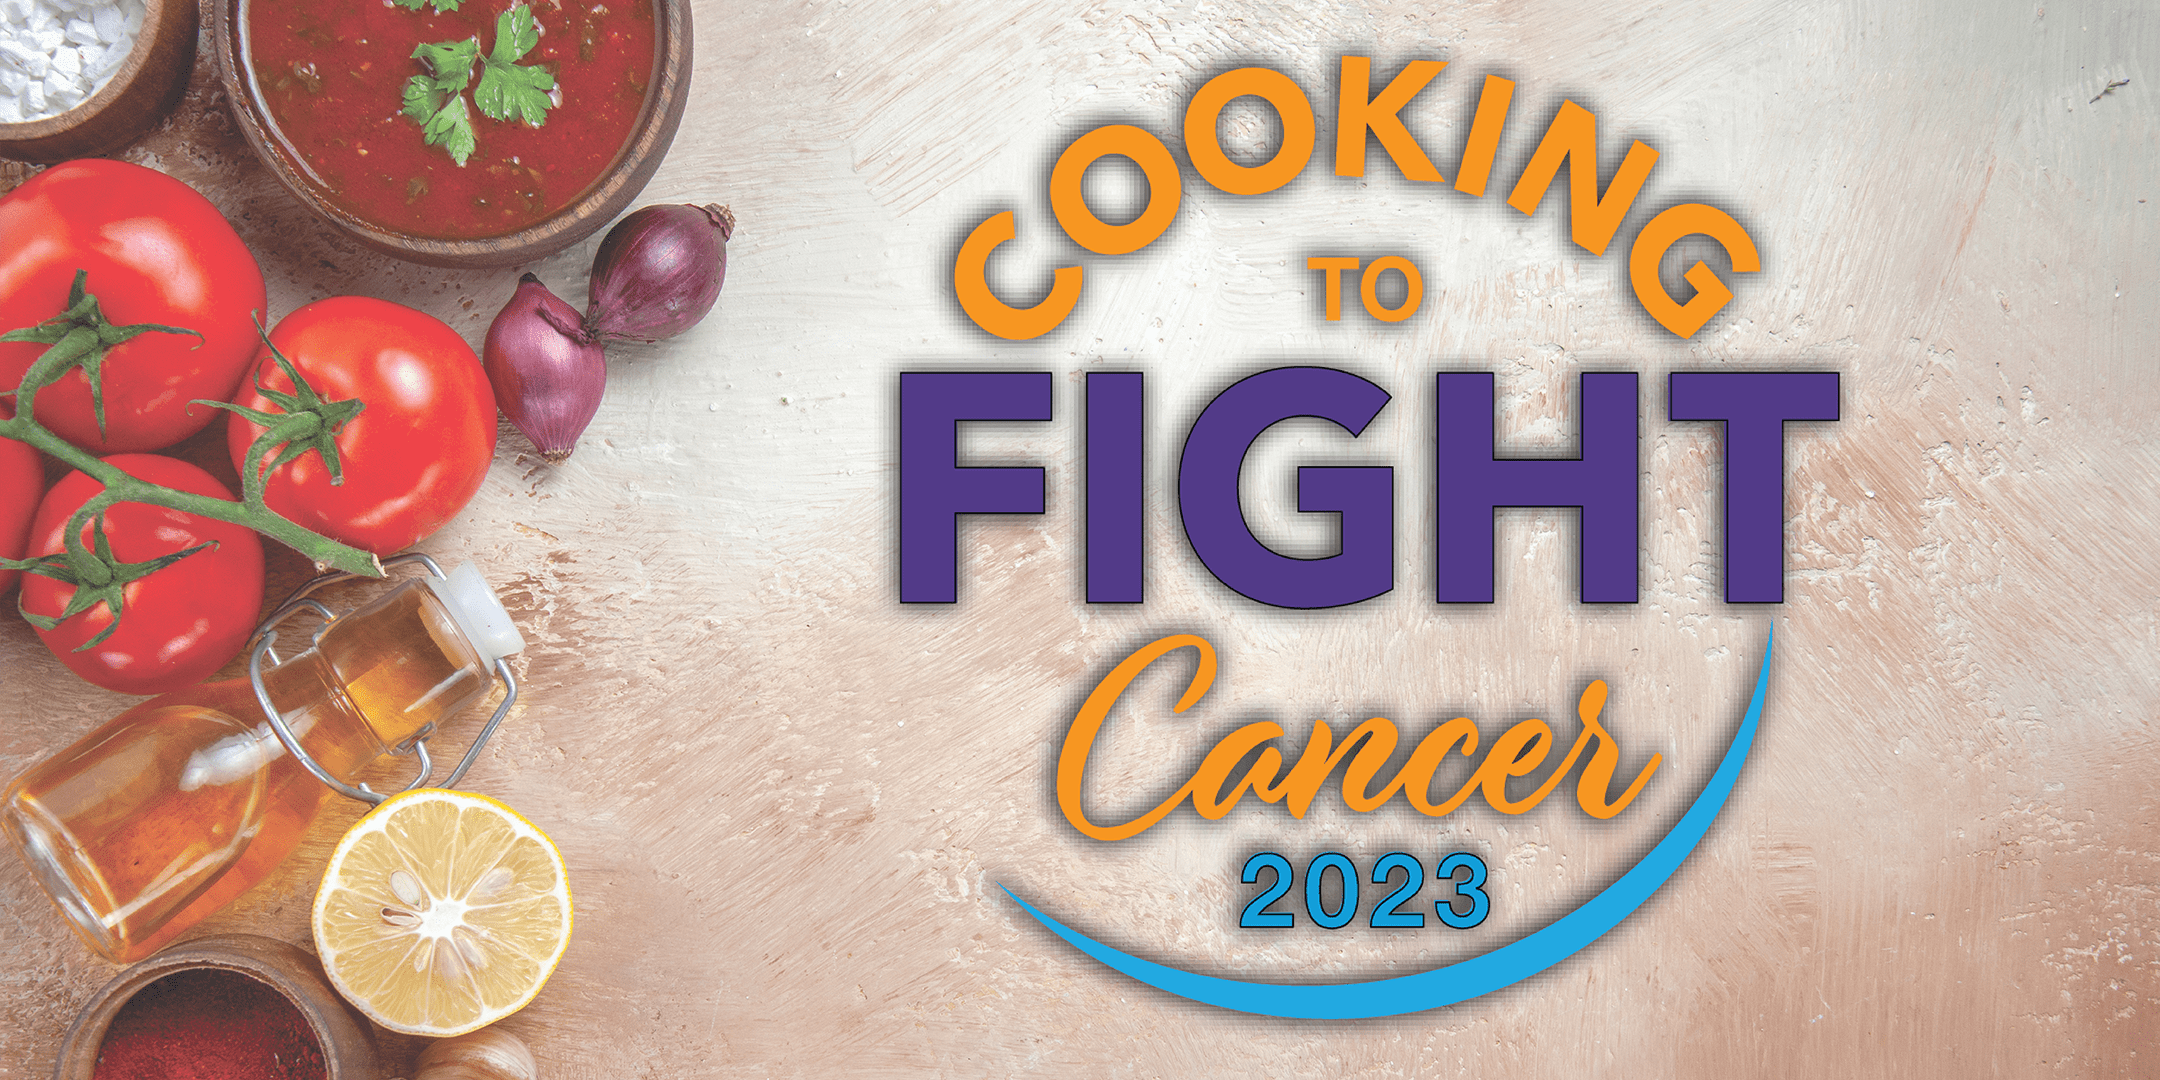 Cooking to Fight Cancer 2023